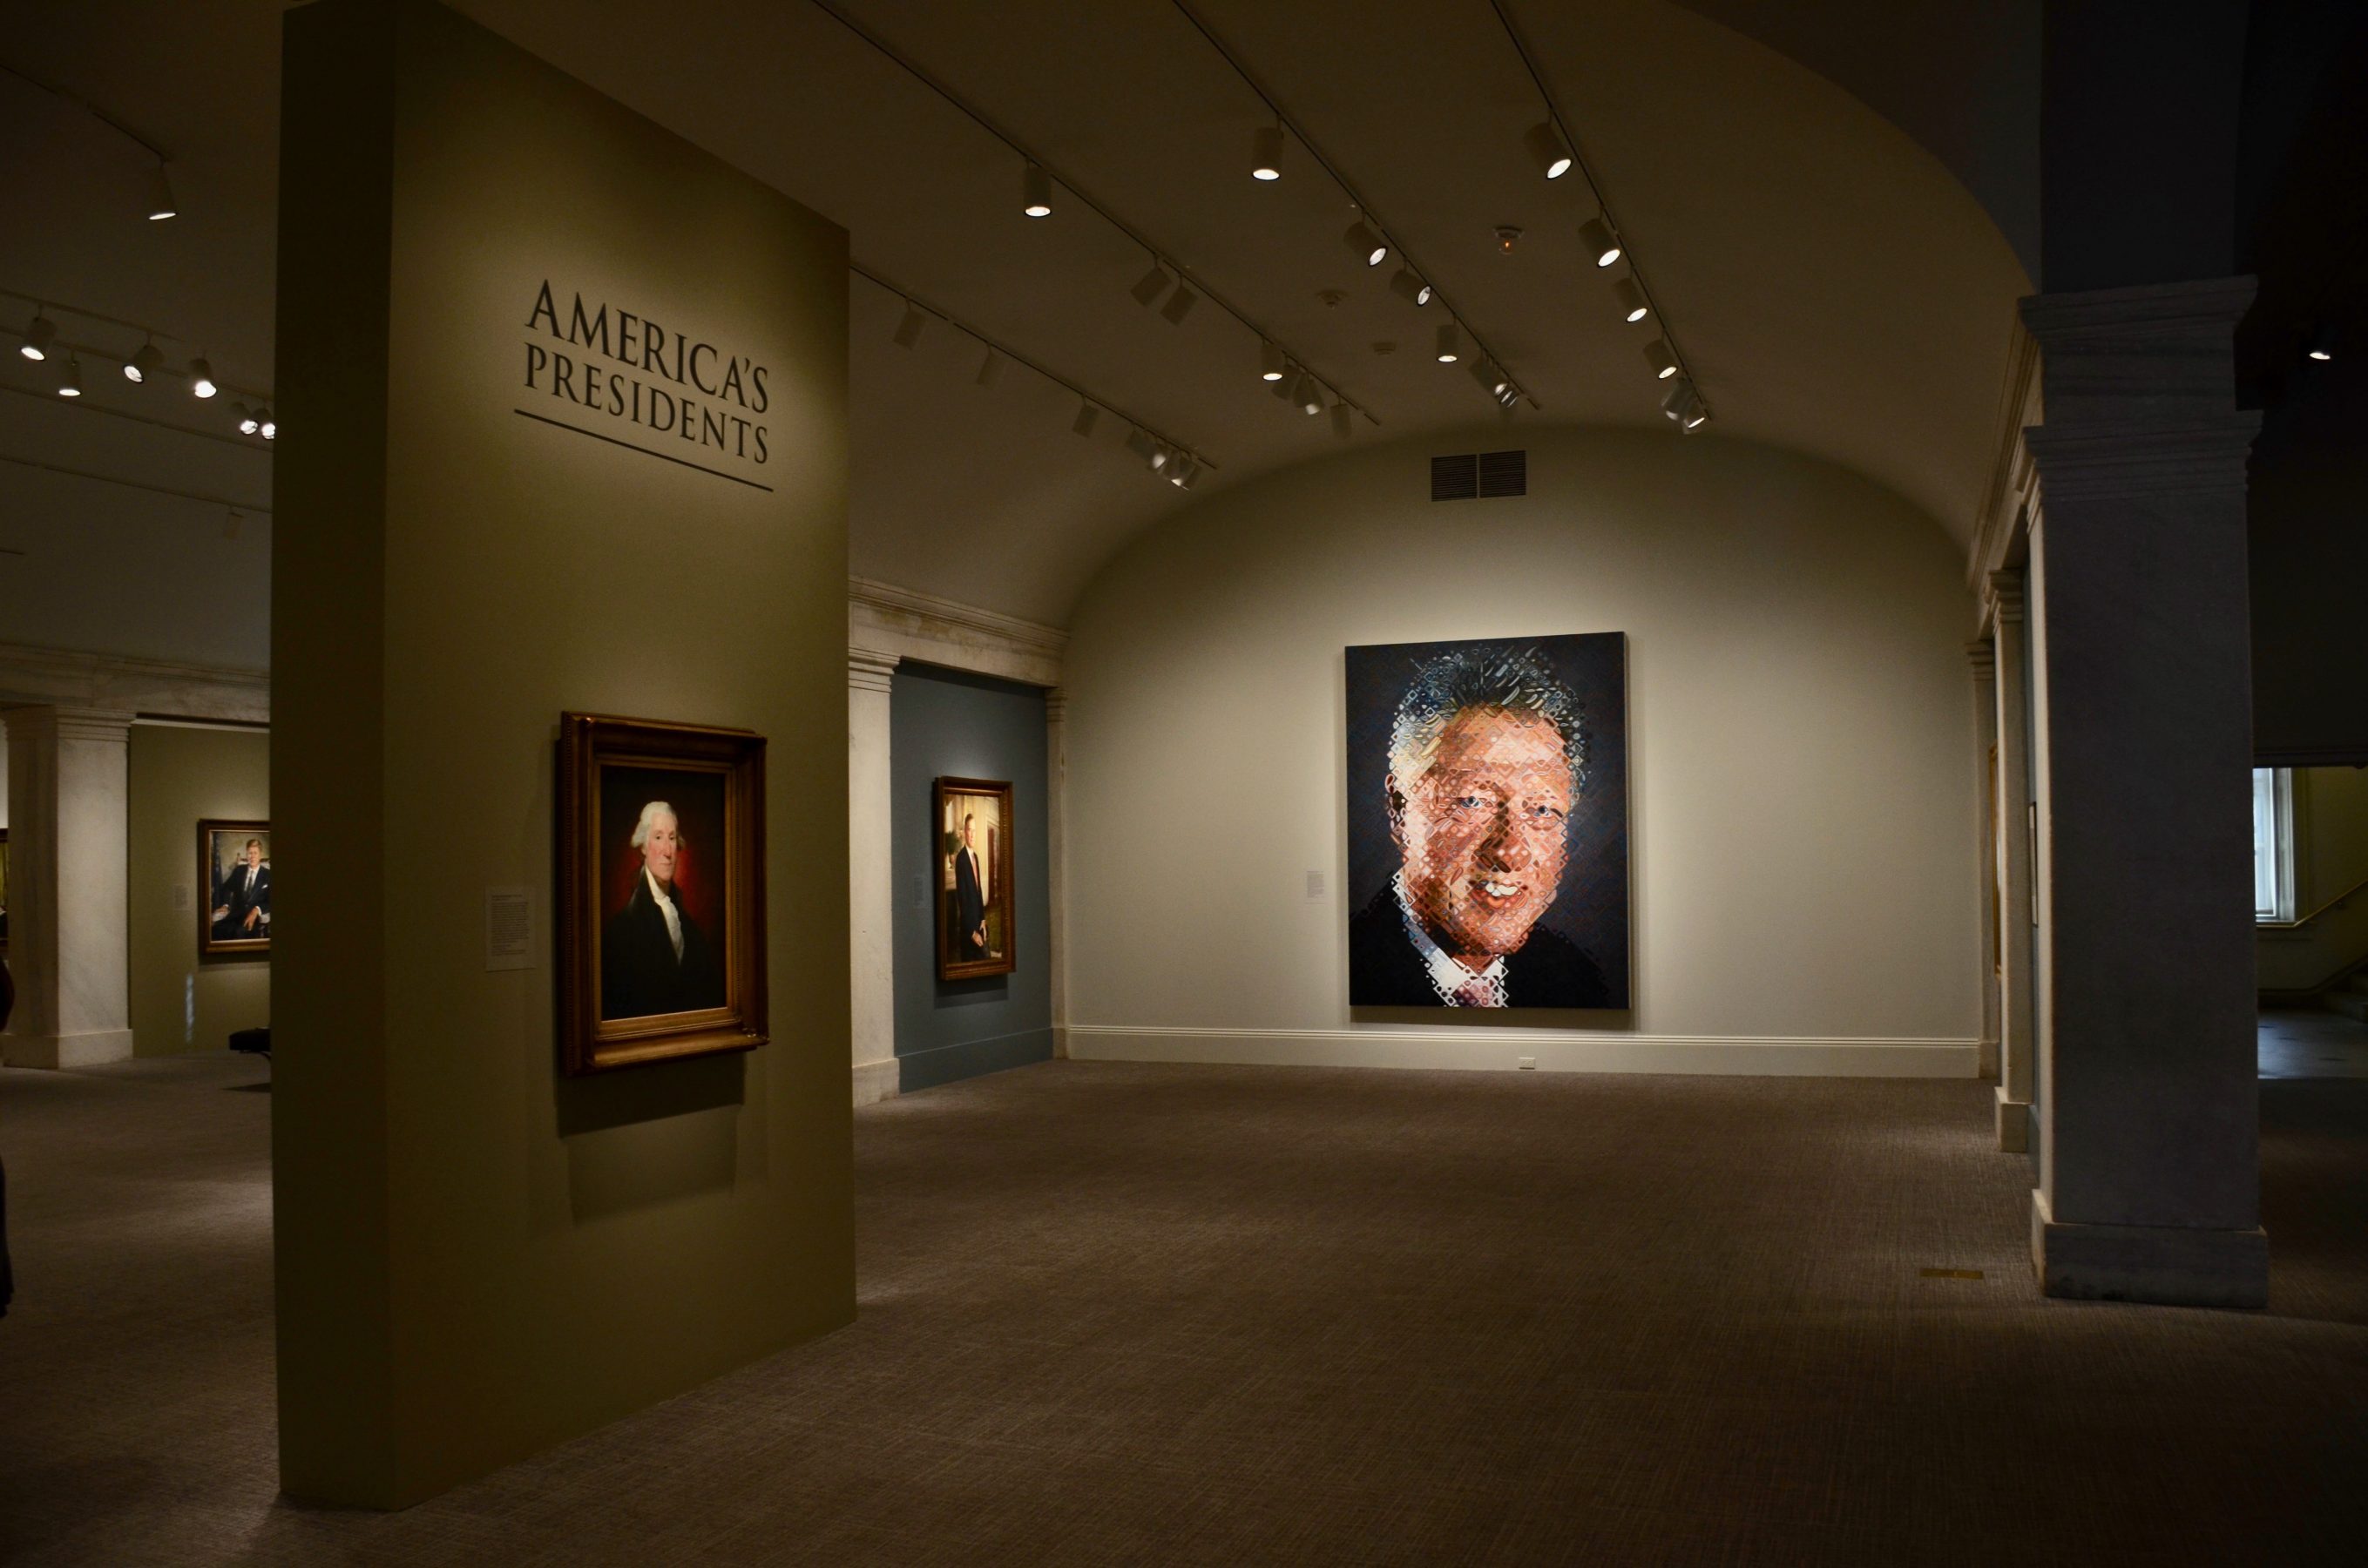 national-portrait-gallery-tells-story-of-america-through-reopened-america-s-presidents